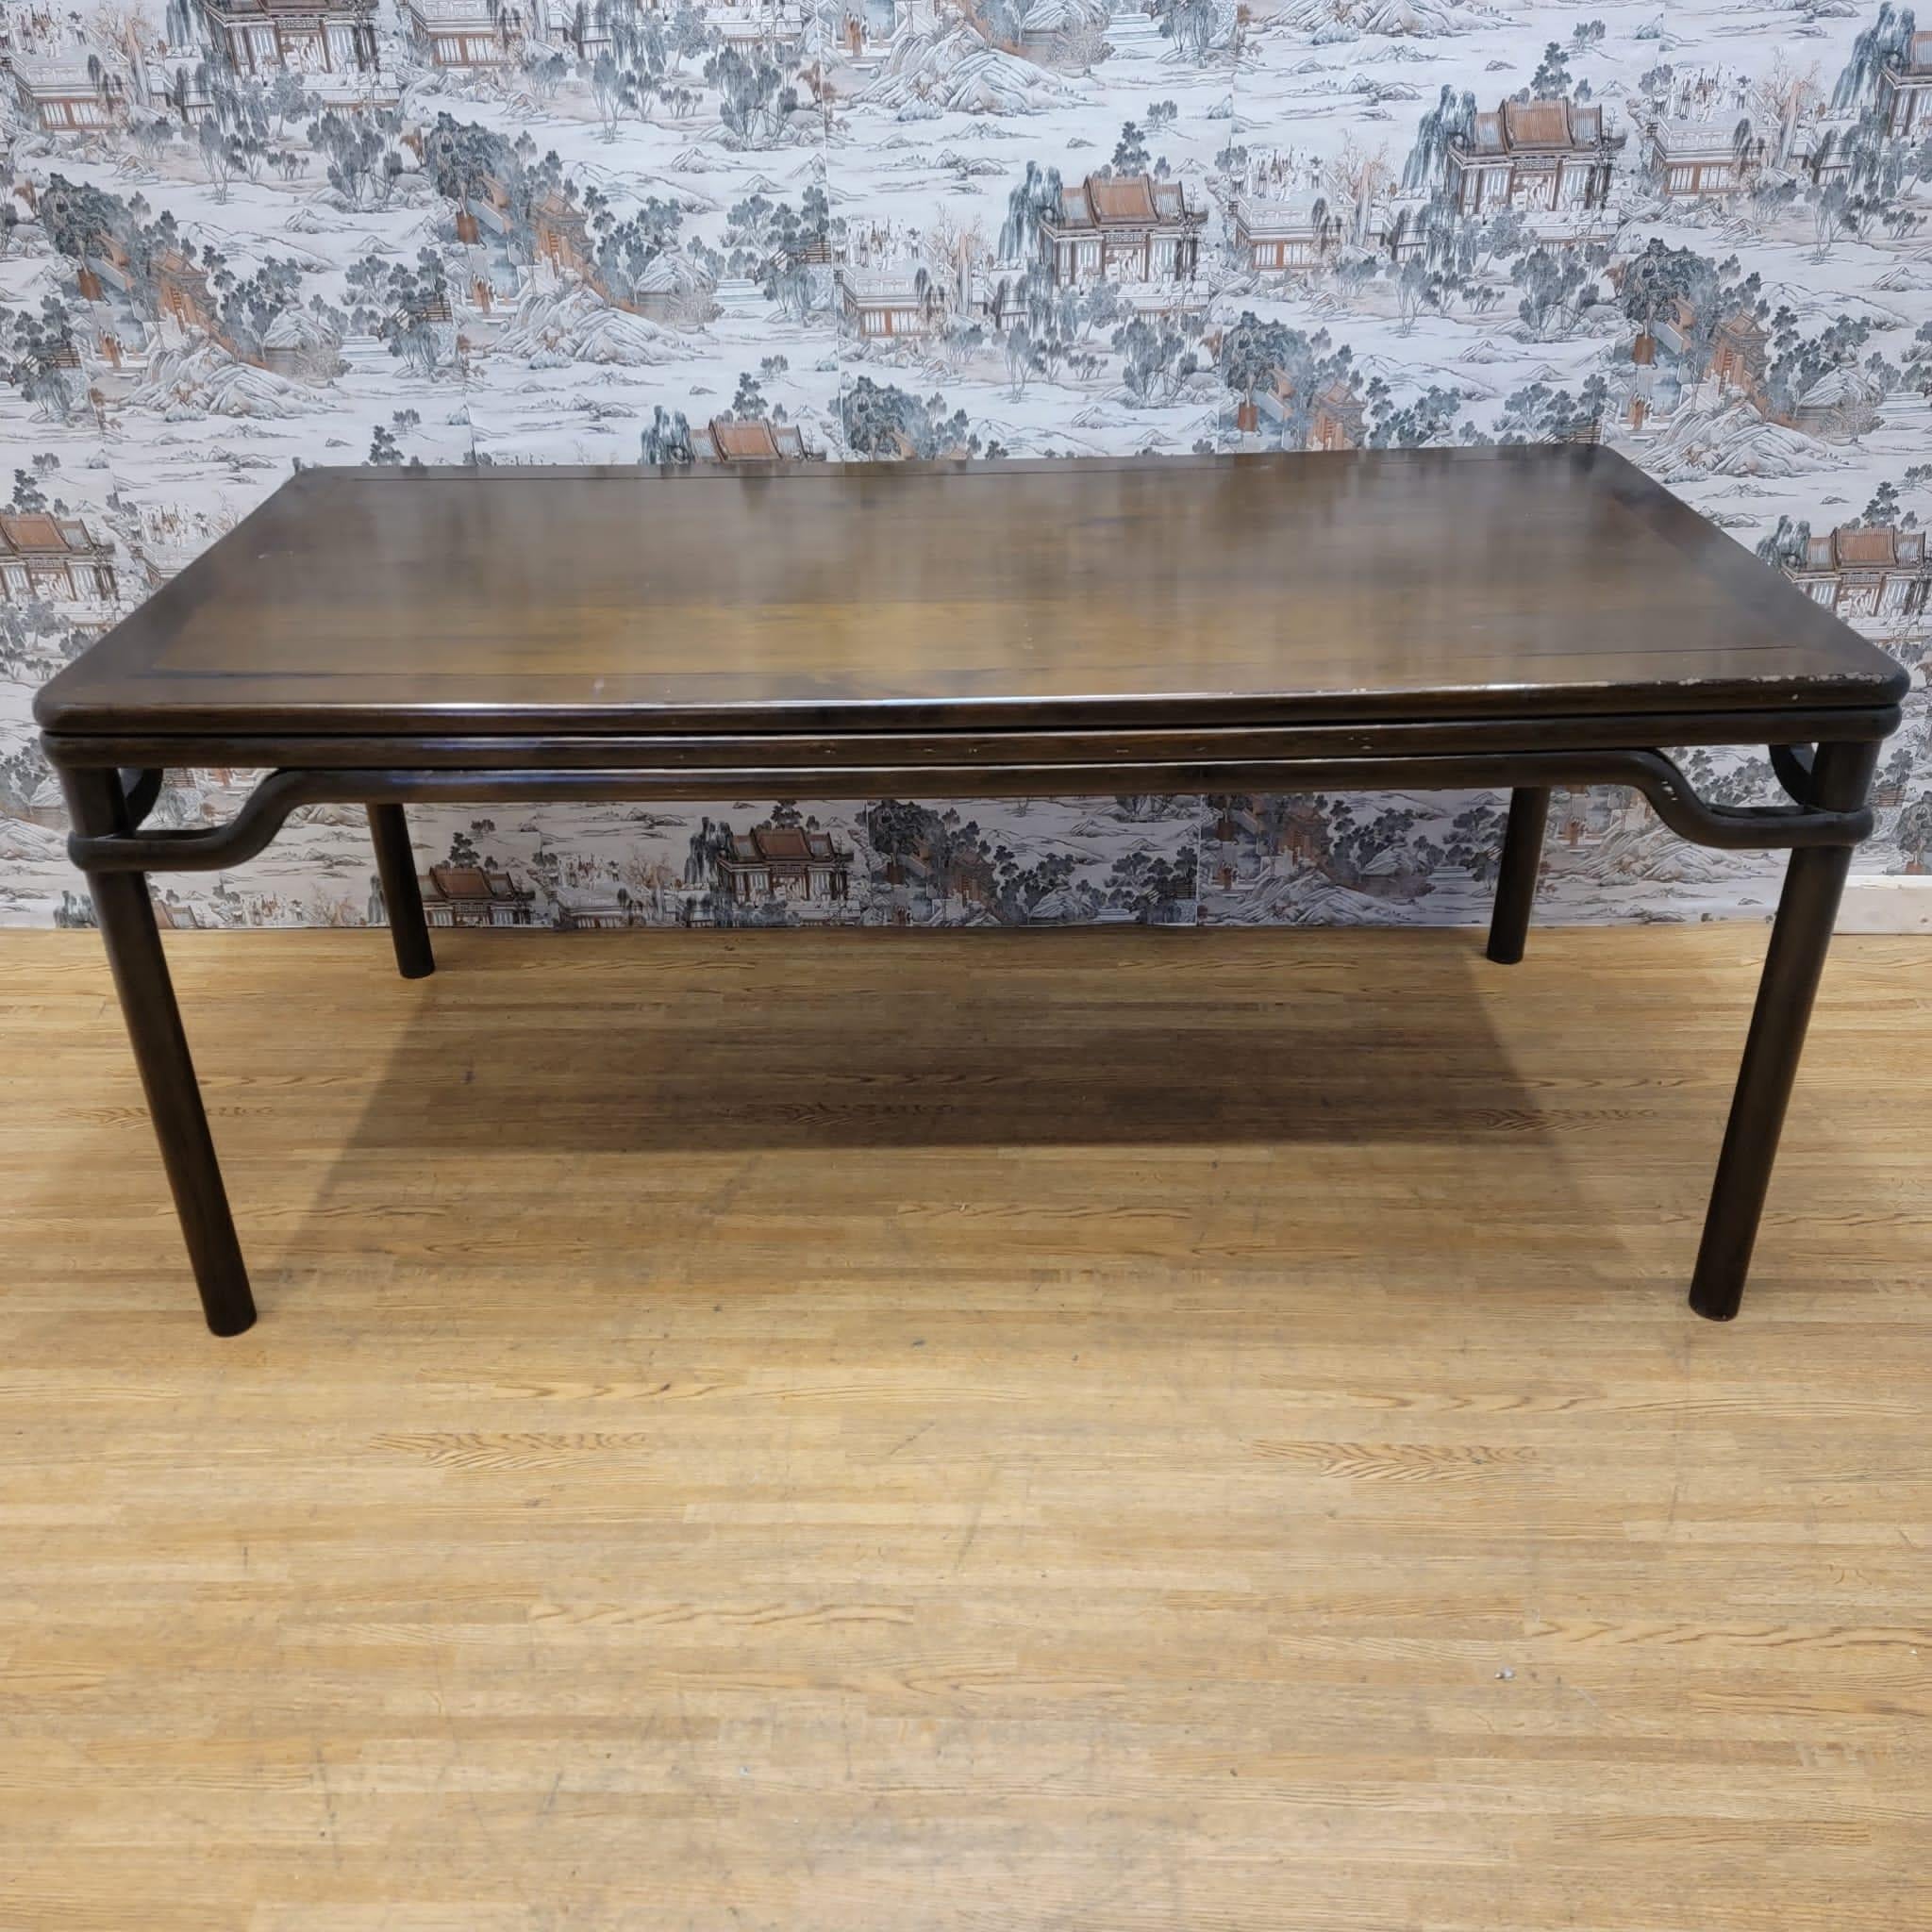 Antique Chinese Elm Humpback Stretcher Altar Table with Original Color and Patin In Good Condition For Sale In Chicago, IL